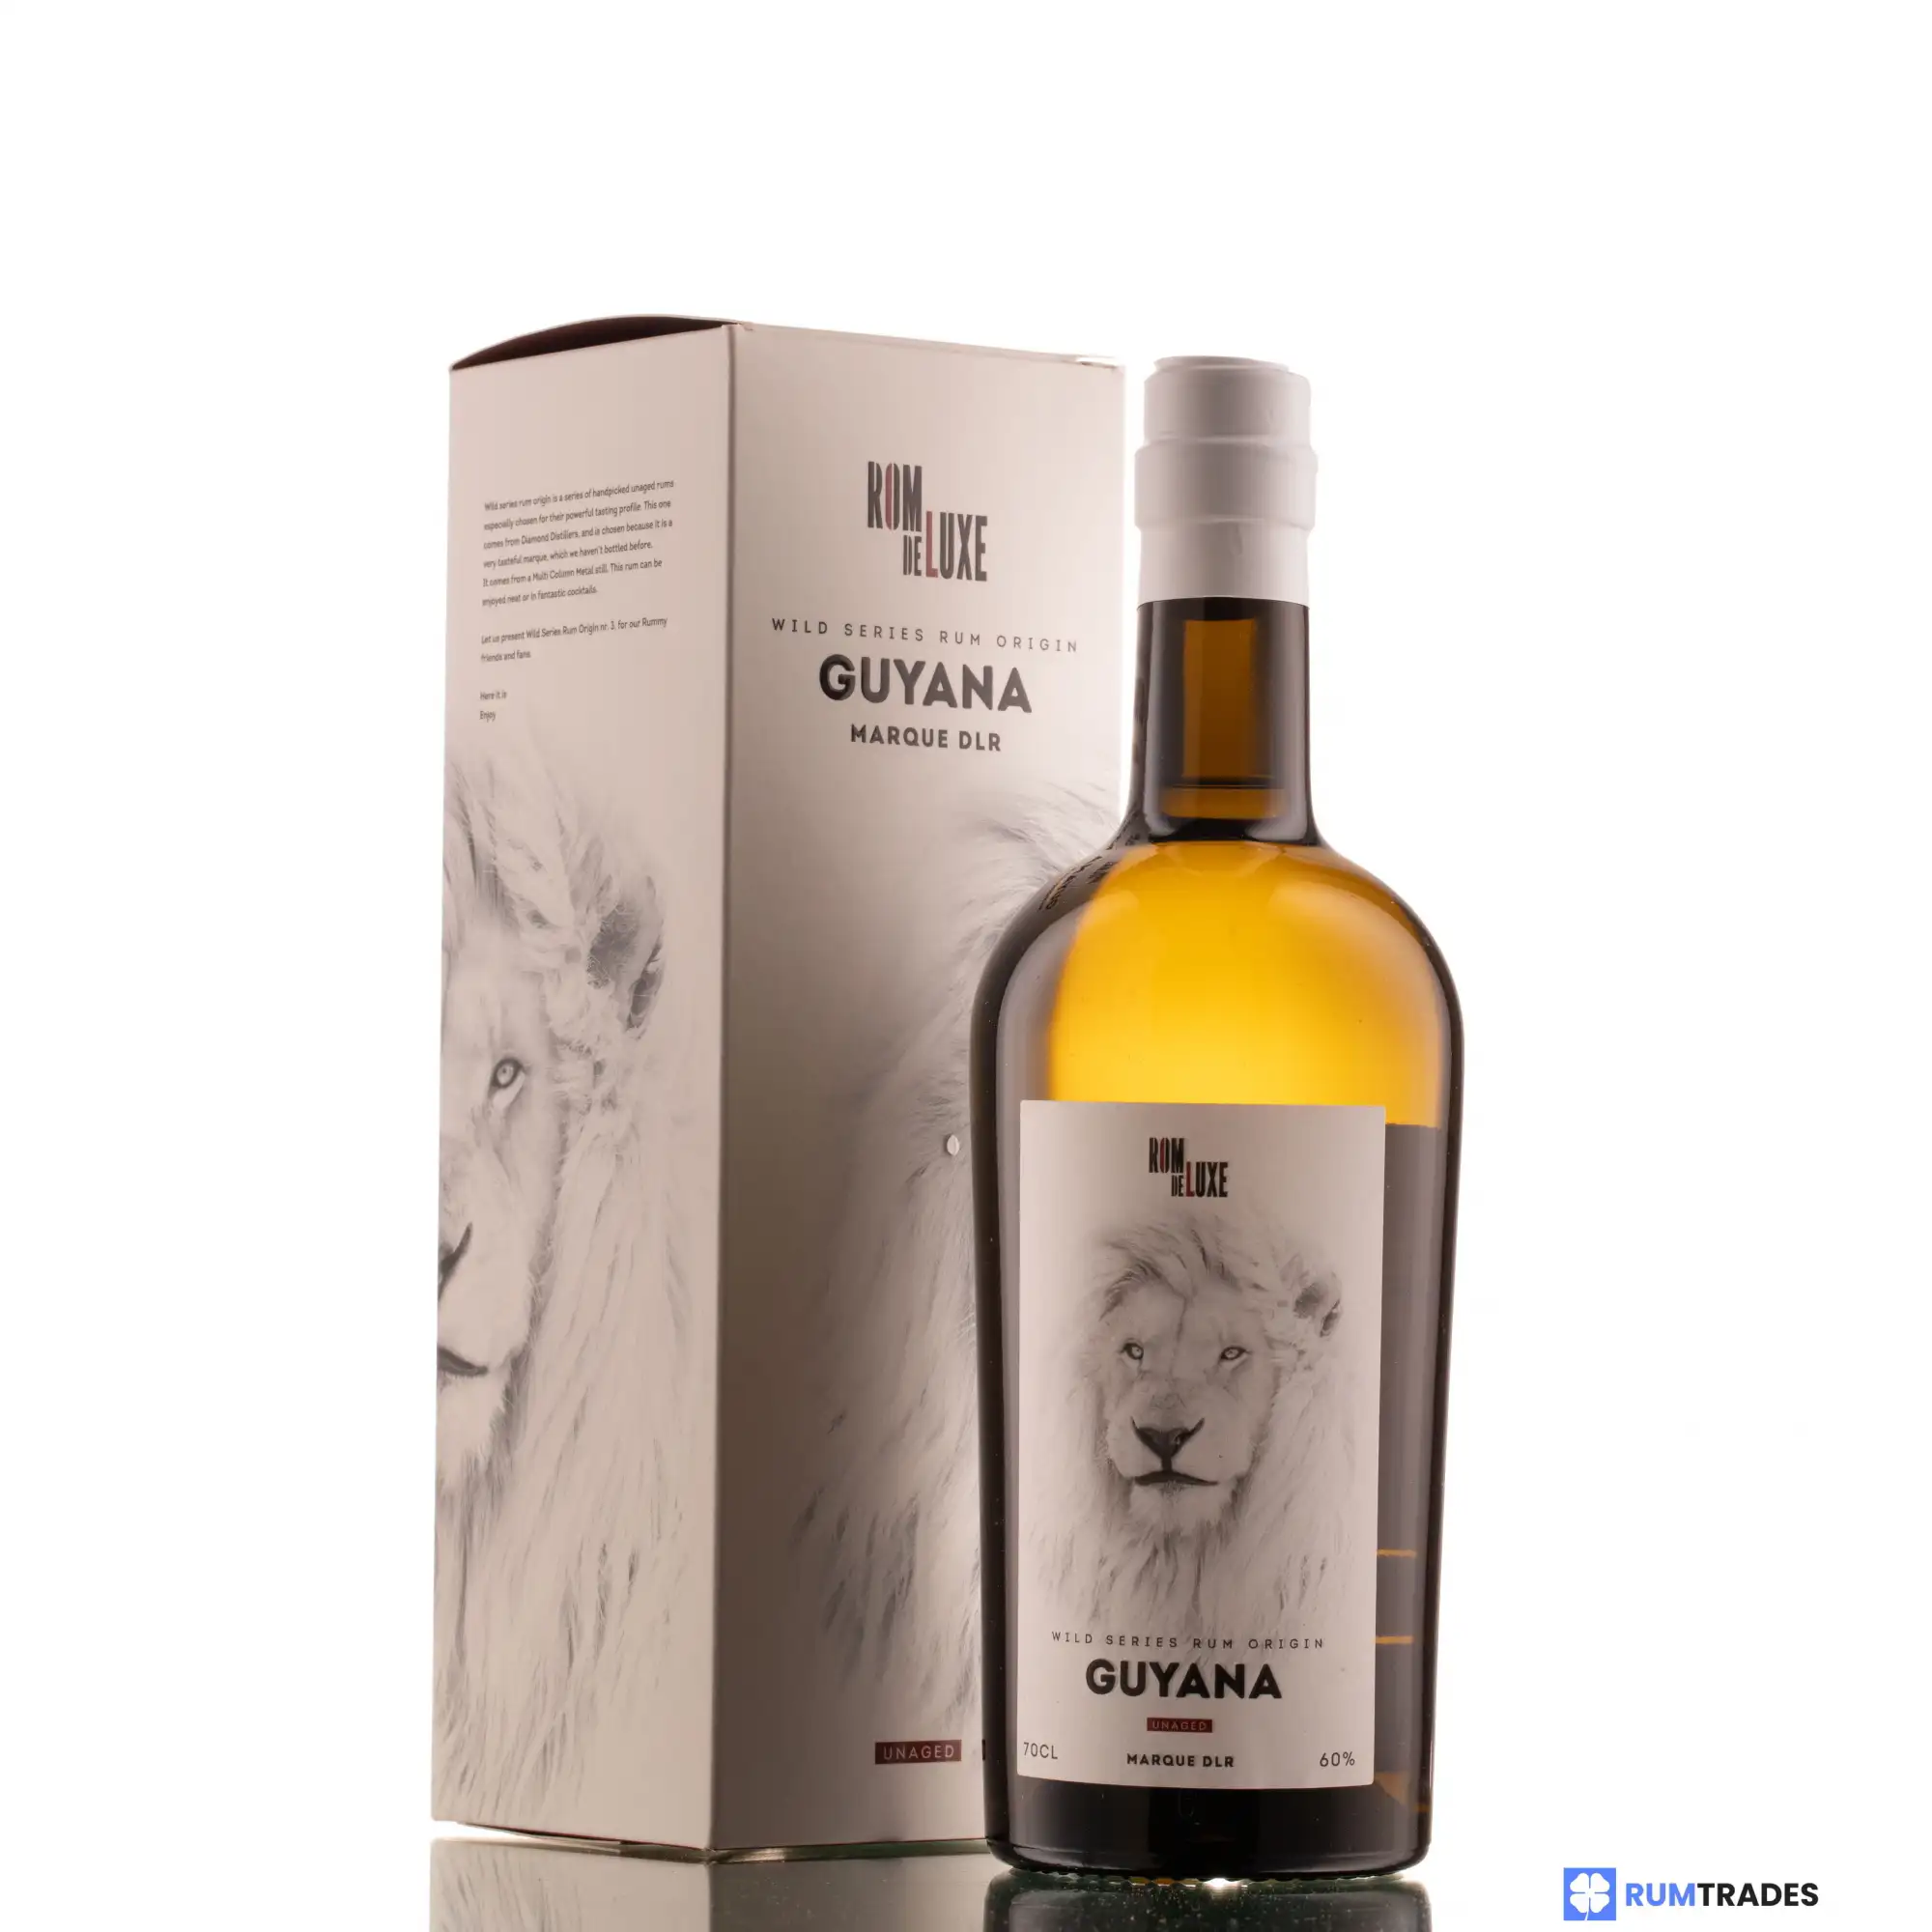 Image of the front of the bottle of the rum Wild Series Rum Origin No. 3 Guyana DLR